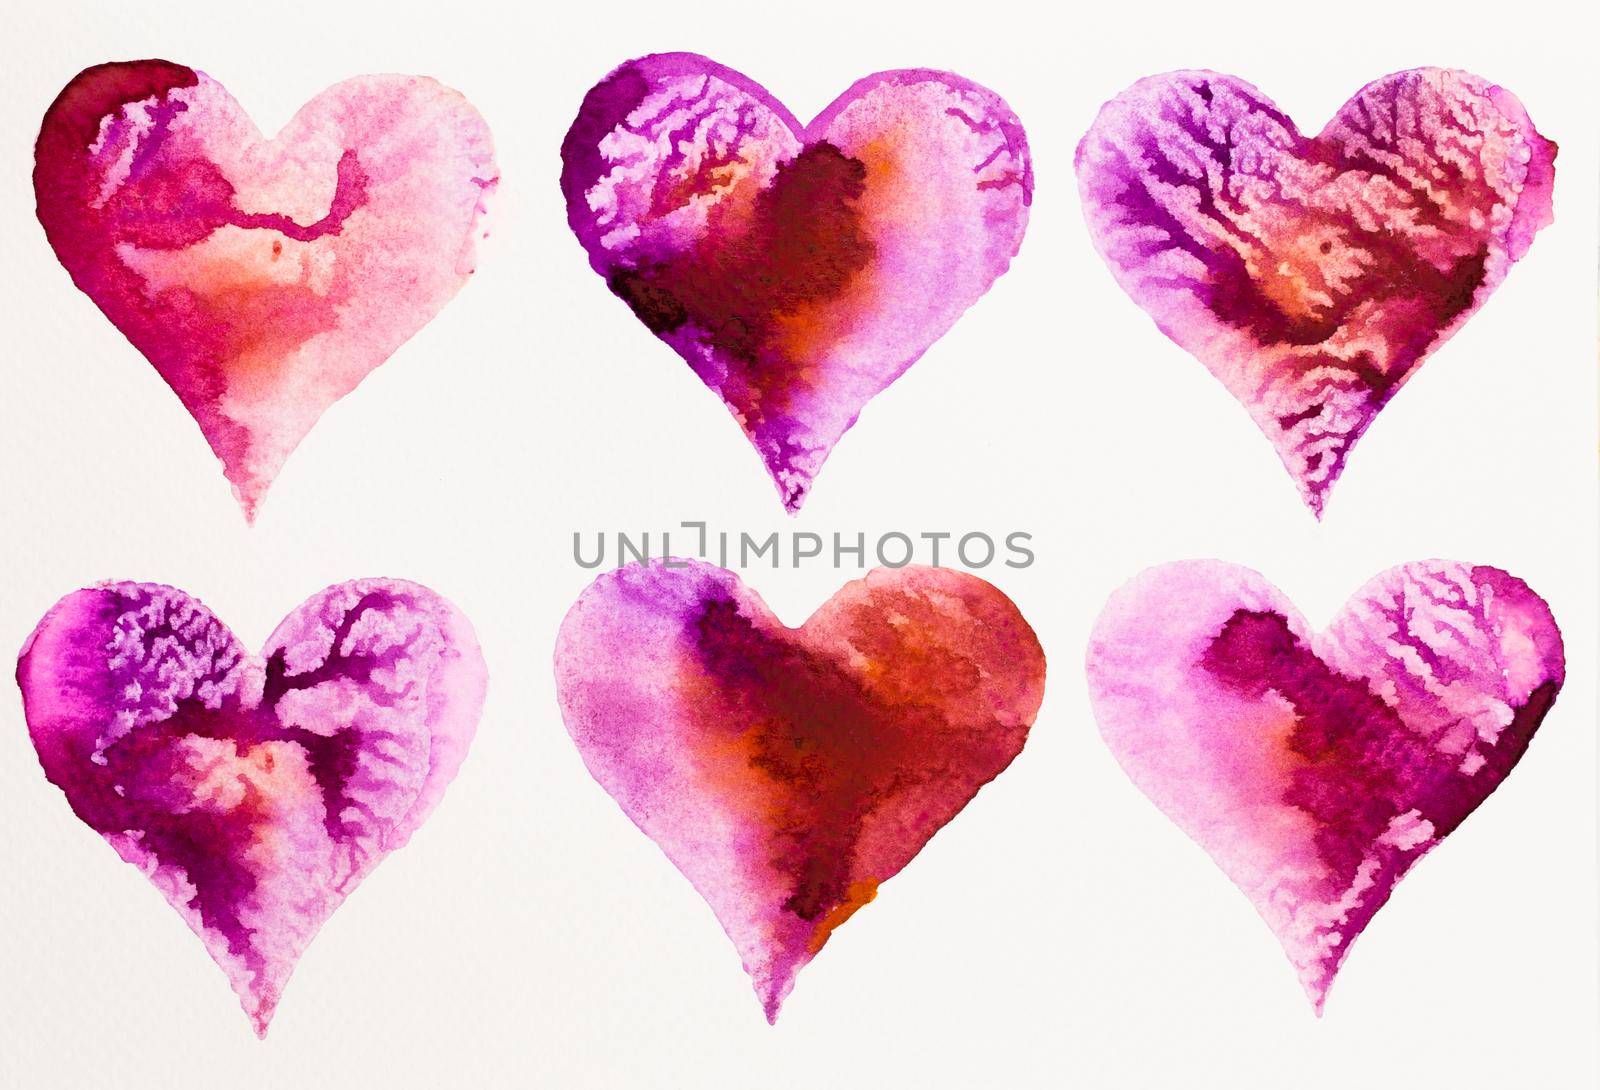 Watercolor painted pink heart, on the white watercolor paper. by gitusik